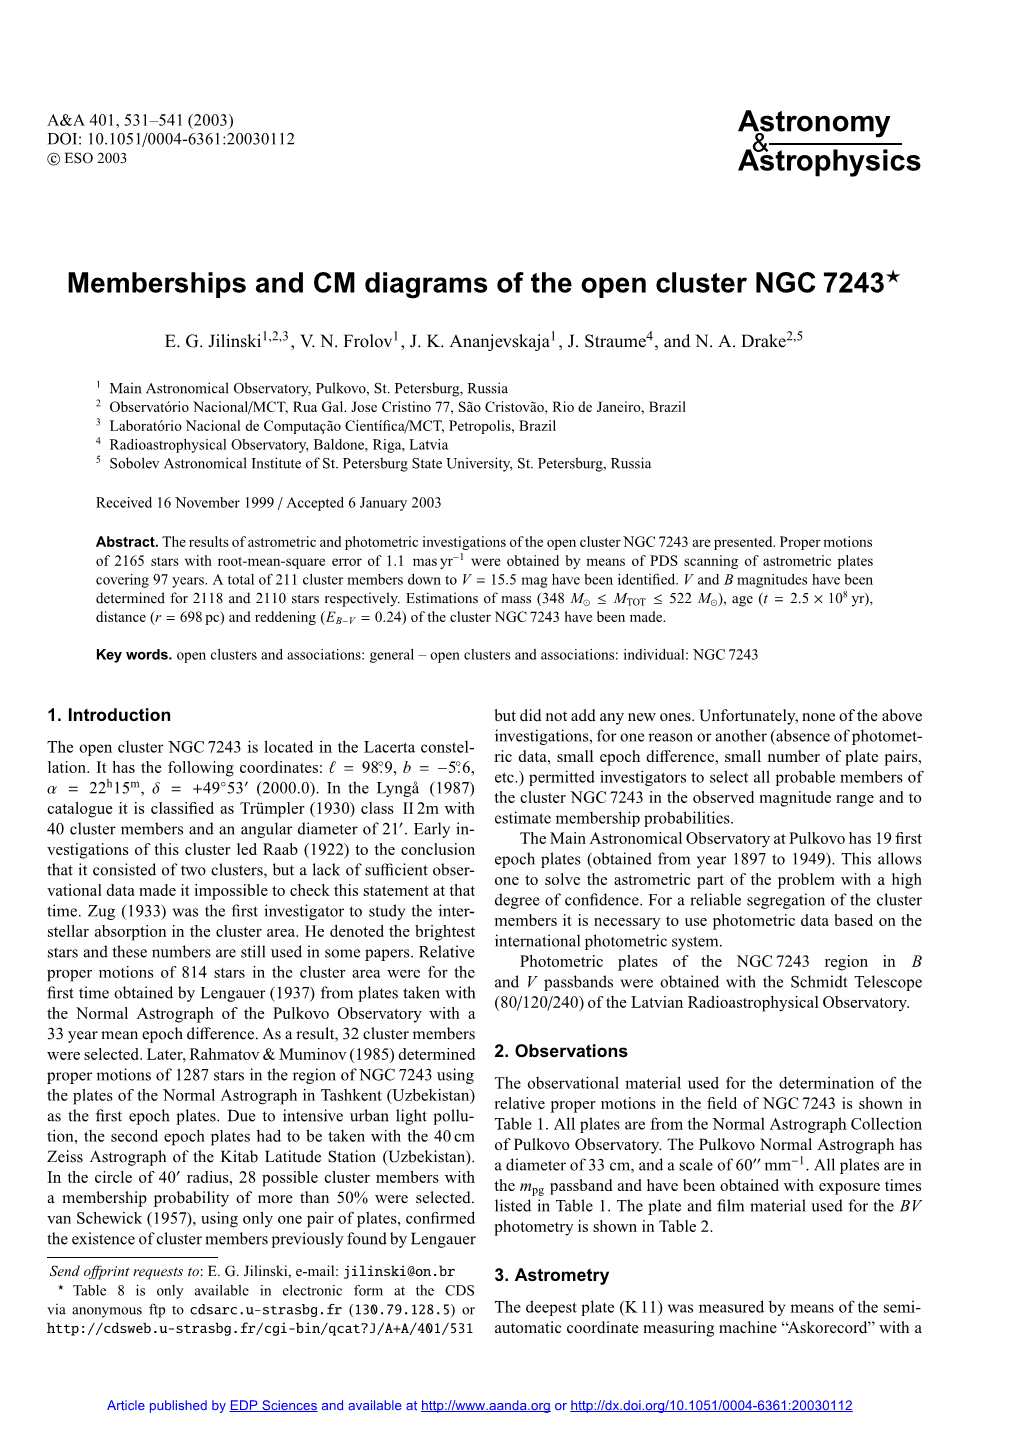 Memberships and CM Diagrams of the Open Cluster NGC 7243?